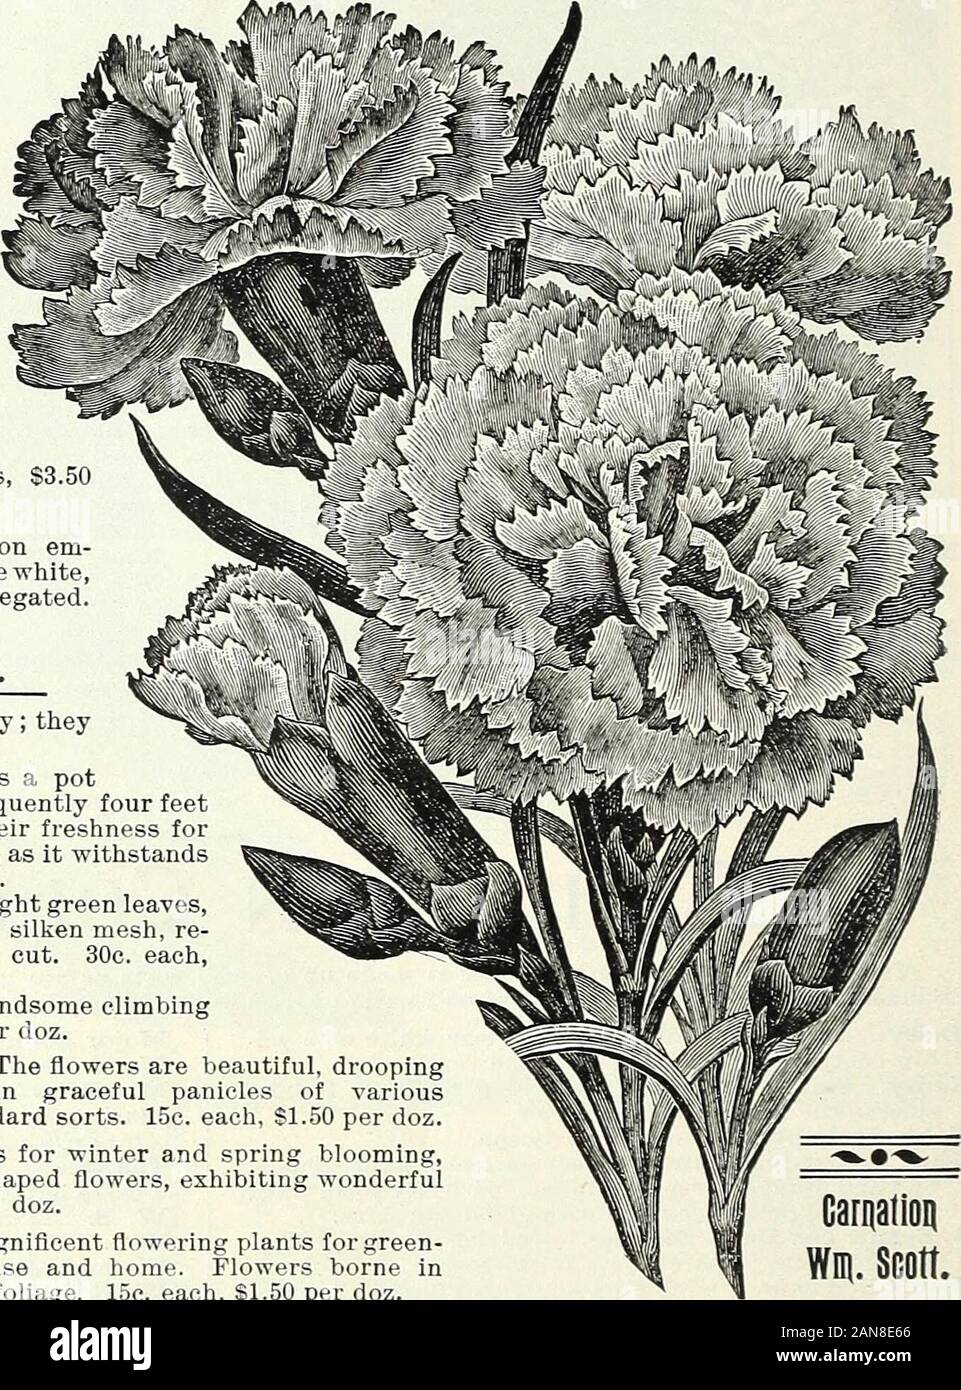 Bulbs, plants, and seeds for autumn planting : 1897 . species, useful as a potplant or for baskets; the fronds are frequently four feetlong, a rich shade of green, retaining their freshness forweeks after being cut. A fine house plant, as it withstandsdry atmosphere. 30c. each, S3.00 per doz. Plumosus Nanus. (Climbing Lace Fern.) Bright green leaves,gracefully arched, and as finely woven as silken mesh, re-taining their freshness for weeks when cut. 30c. each,$3.00 per doz. Tenuissimus. Very fine filmy foliage. A handsome climbingplant for the window. 15c. each, $1.50 per doz. SEGONIRS (in Vaf Stock Photo